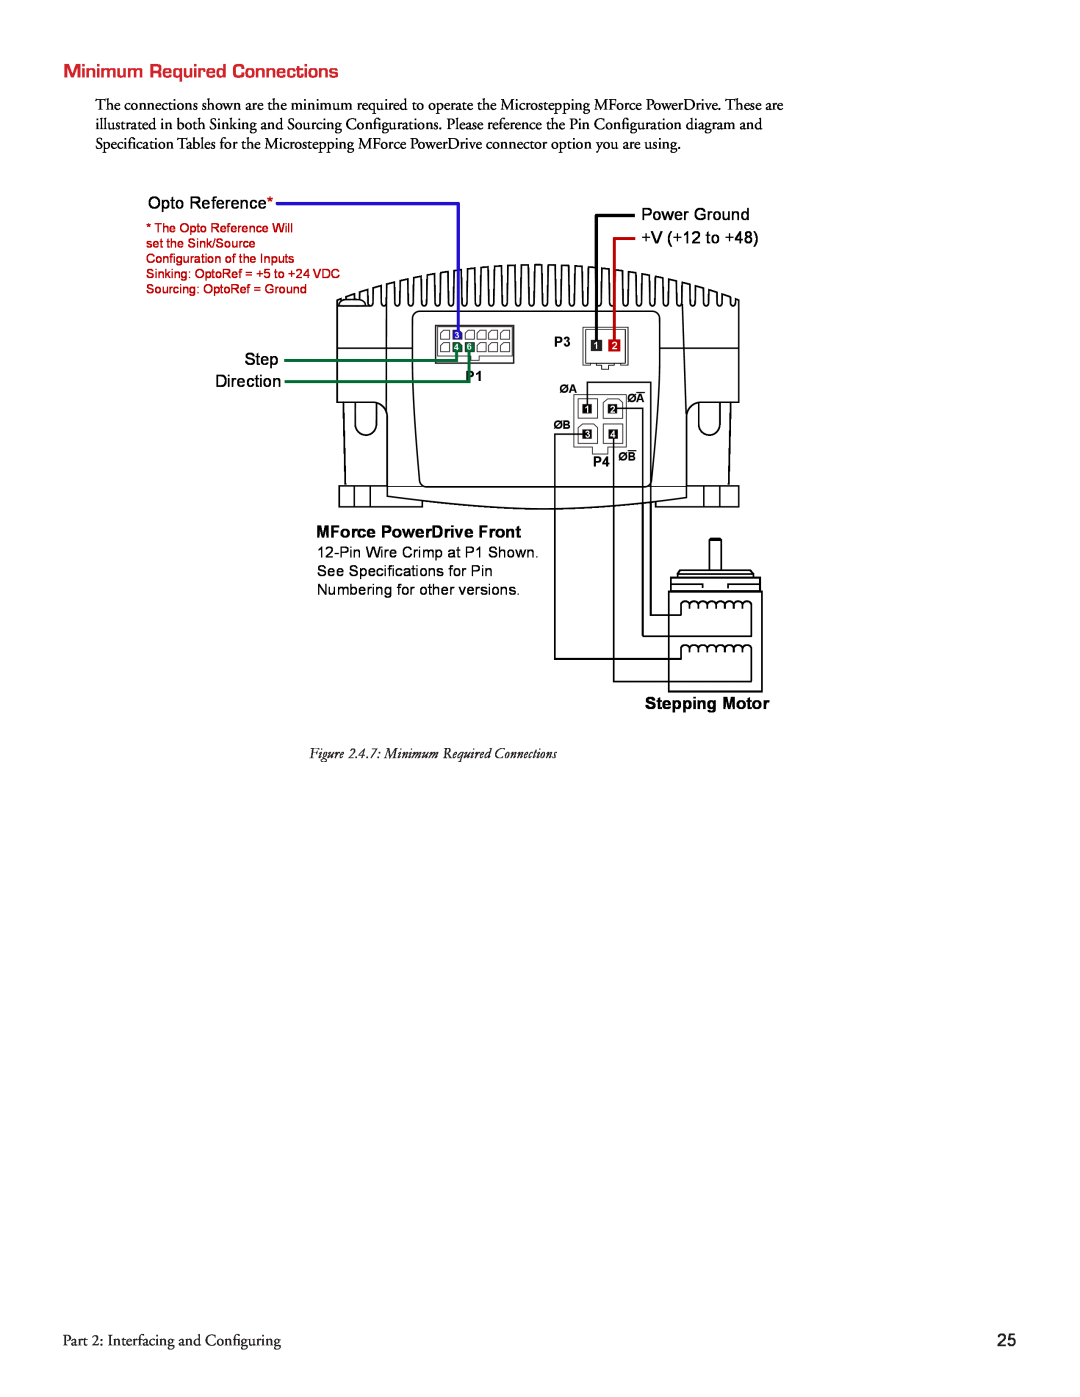 Intelligent Motion Systems Motion Detector Minimum Required Connections, Opto Reference, Power Ground, Step, Direction 